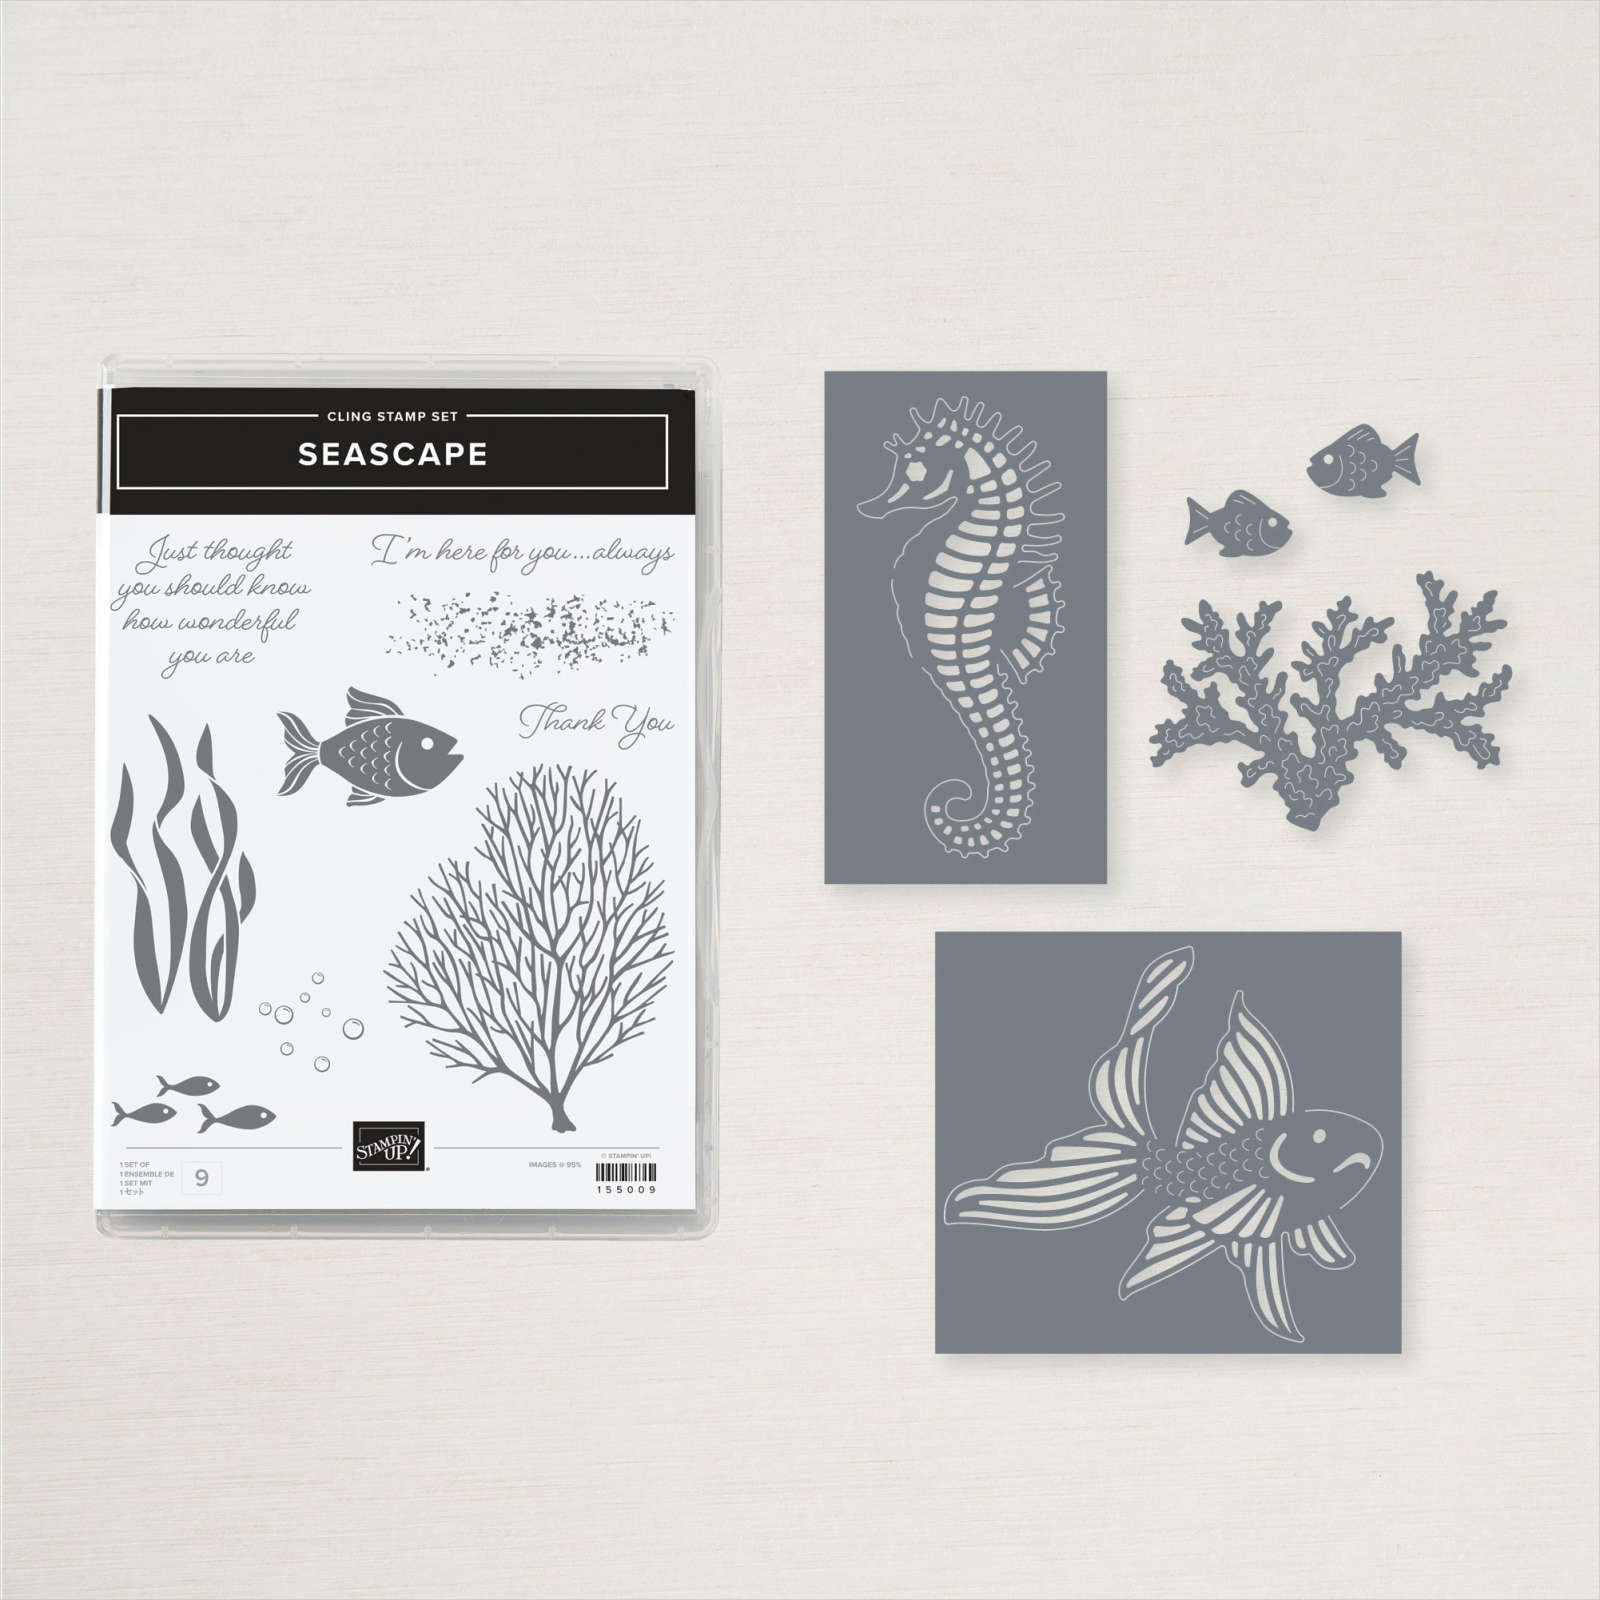 Make Cards Using The Seascape Bundle By Stampin' Up!